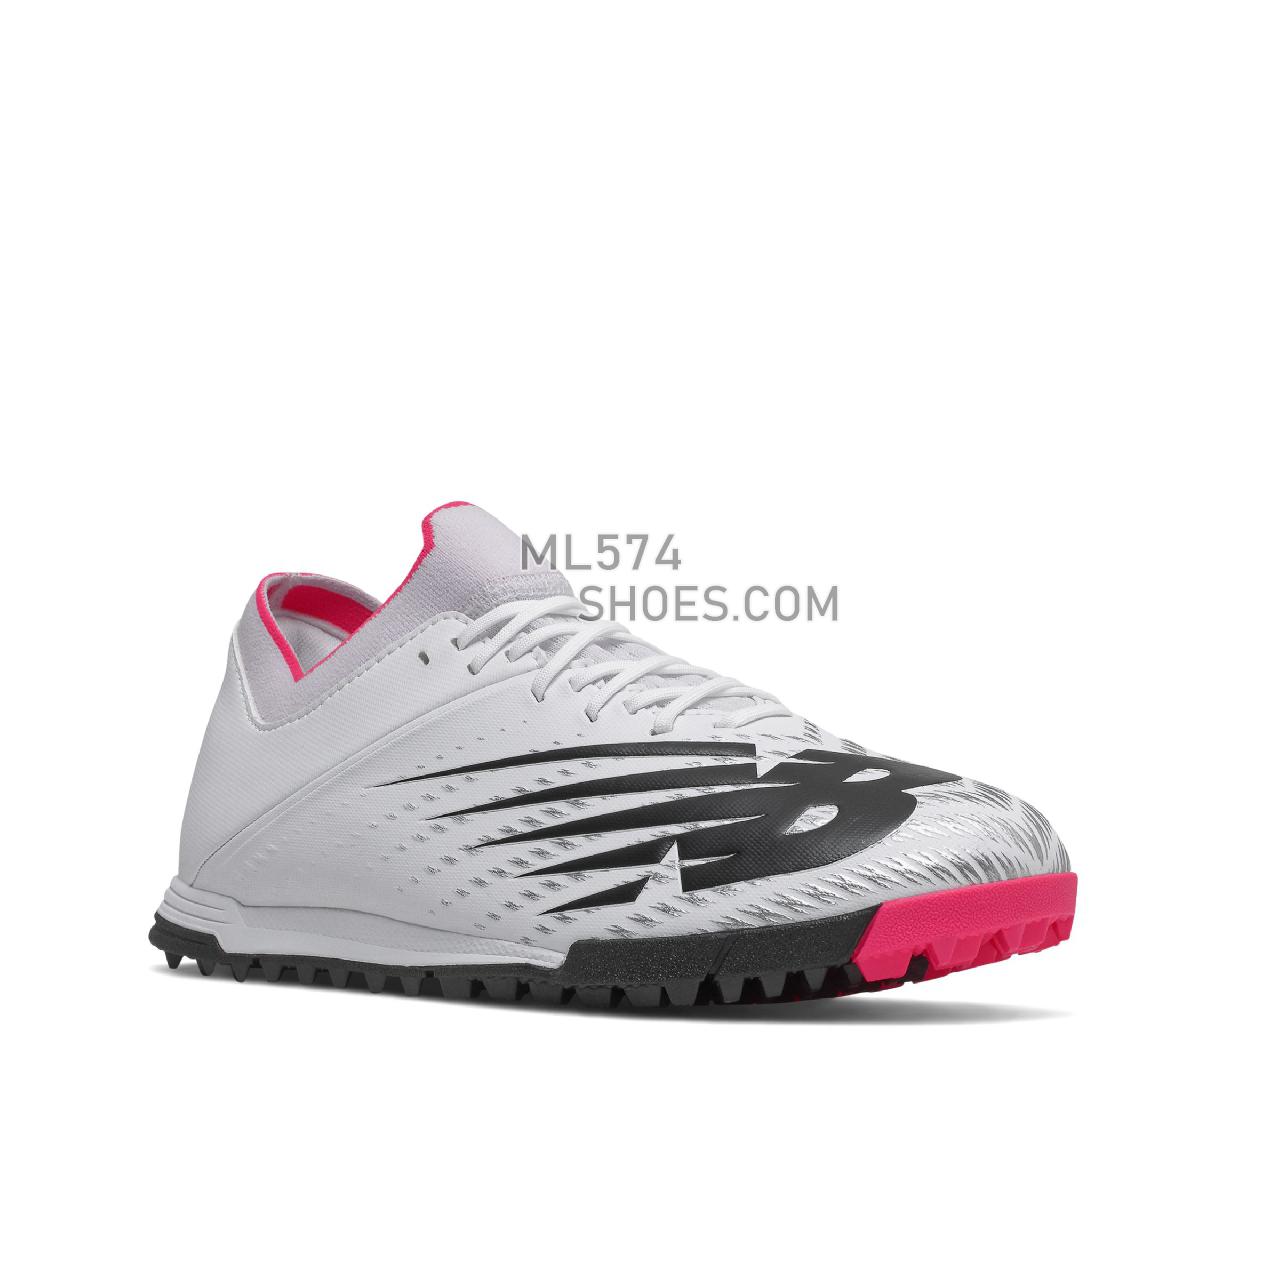 New Balance Furon V6+ Dispatch TF - Men's Turf FootBall Boots - White with Silver and Alpha Pink - MSF3TP65